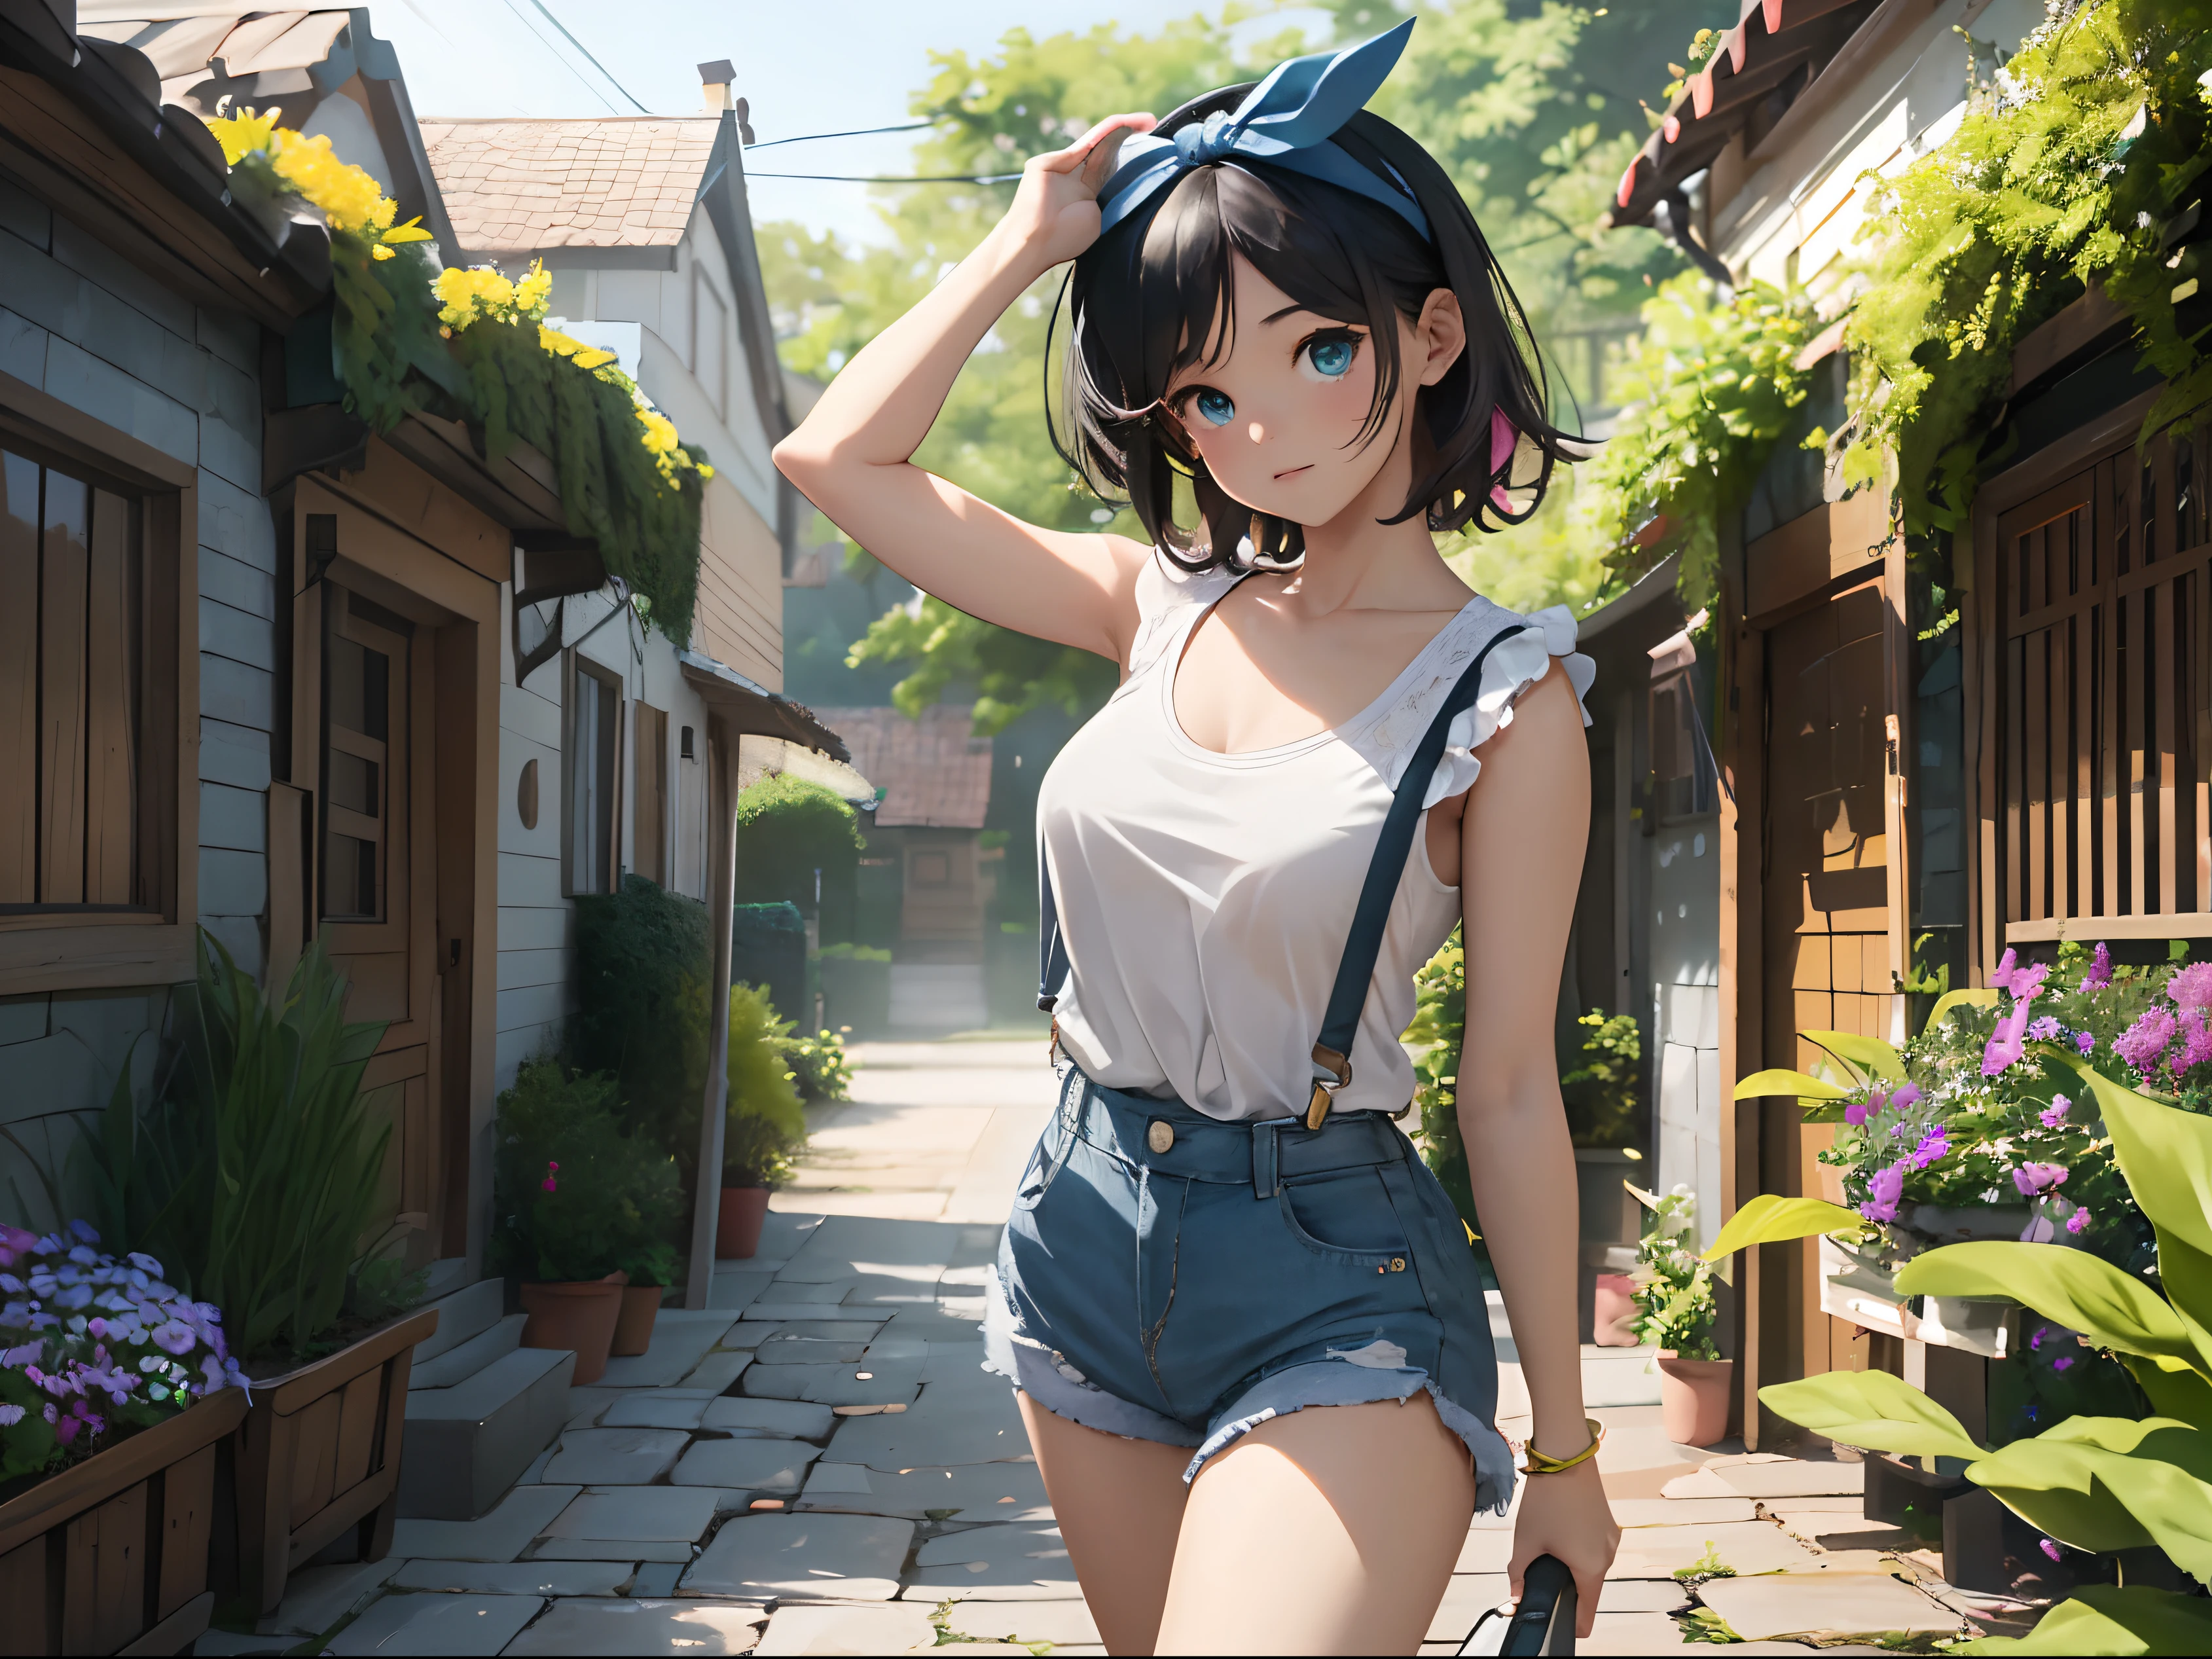 (best quality,4k,8k,highres,masterpiece:1.2),ultra-detailed,(realistic,photorealistic,photo-realistic:1.37),Denim shorts,white sneakers,white tank top,black hair,(beautiful,detailed:1.1) teal eyes,(long, curly:1.1) black hairband, (fresh-faced, radiant:1.1) girl, (playfully, carefree:1.1) The (bright, natural:1.1) sunlight (illuminates, filters through:1.1) the scene, casting (soft, gentle:1.1) shadows on the girl's (joyful, (youthful, radiant:1.1) face).

The girl's (big, expressive:1.1) teal eyes stand out against her (flawless, smooth:1.1) skin, which has a (subtle, natural:1.1) glow. Her (lush, voluminous:1.1) black hair is styled neatly, with a (loose, effortless:1.1) curl framing her face. 

She is wearing a pair of (stylish, fashionable:1.1) denim shorts that fit her perfectly, paired with (clean, pristine:1.1) white sneakers. Her choice of a (simple, elegant:1.1) white tank top complements the casual and playful vibe of the outfit. A (stylish, trendy:1.1) black hairband holds her hair in place, adding a touch of charm to her overall look.

The garden around her is bursting with life and color. The (delicate, vibrant:1.1) flowers in shades of pink, yellow, and purple create a stunning backdrop. 

In this high-quality artwork, every detail is meticulously crafted to capture the essence of the girl and her surroundings. The realistic rendering showcases the girl's beauty and radiance, highlighting the vibrant colors and textures of the garden.

With its vivid colors, sharp focus, and fine detail description, this masterpiece depicts a youthful girl in denim shorts, white sneakers, and a white tank top, radiating joy and carefree spirit in a vibrant garden surrounded by blooming flowers and lush greenery. The photorealistic depiction of the girl's teal eyes and black hair enhances the overall realism of the image.

The lighting in the scene perfectly captures the natural sunlight, creating soft and gentle shadows that accentuate the girl's features. The